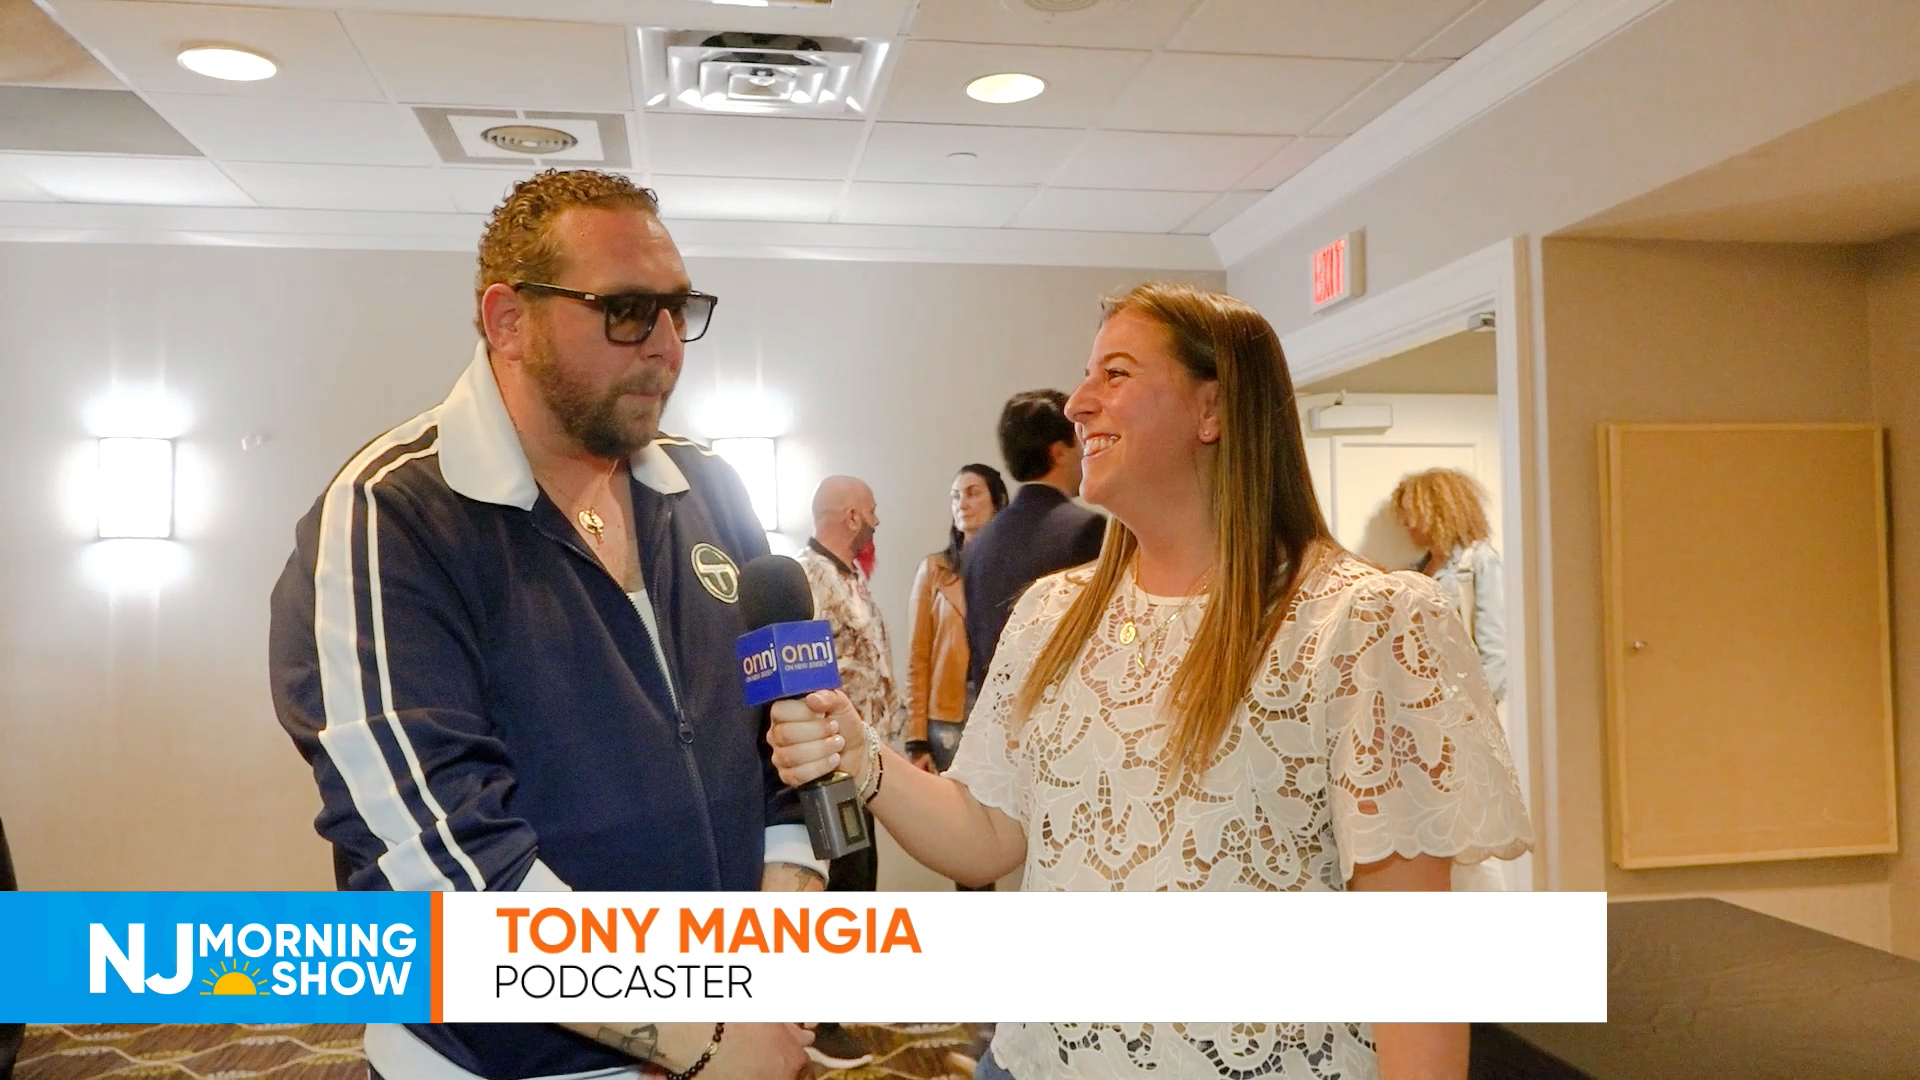 NJ Morning Show – Interview with Tony Mangia at...